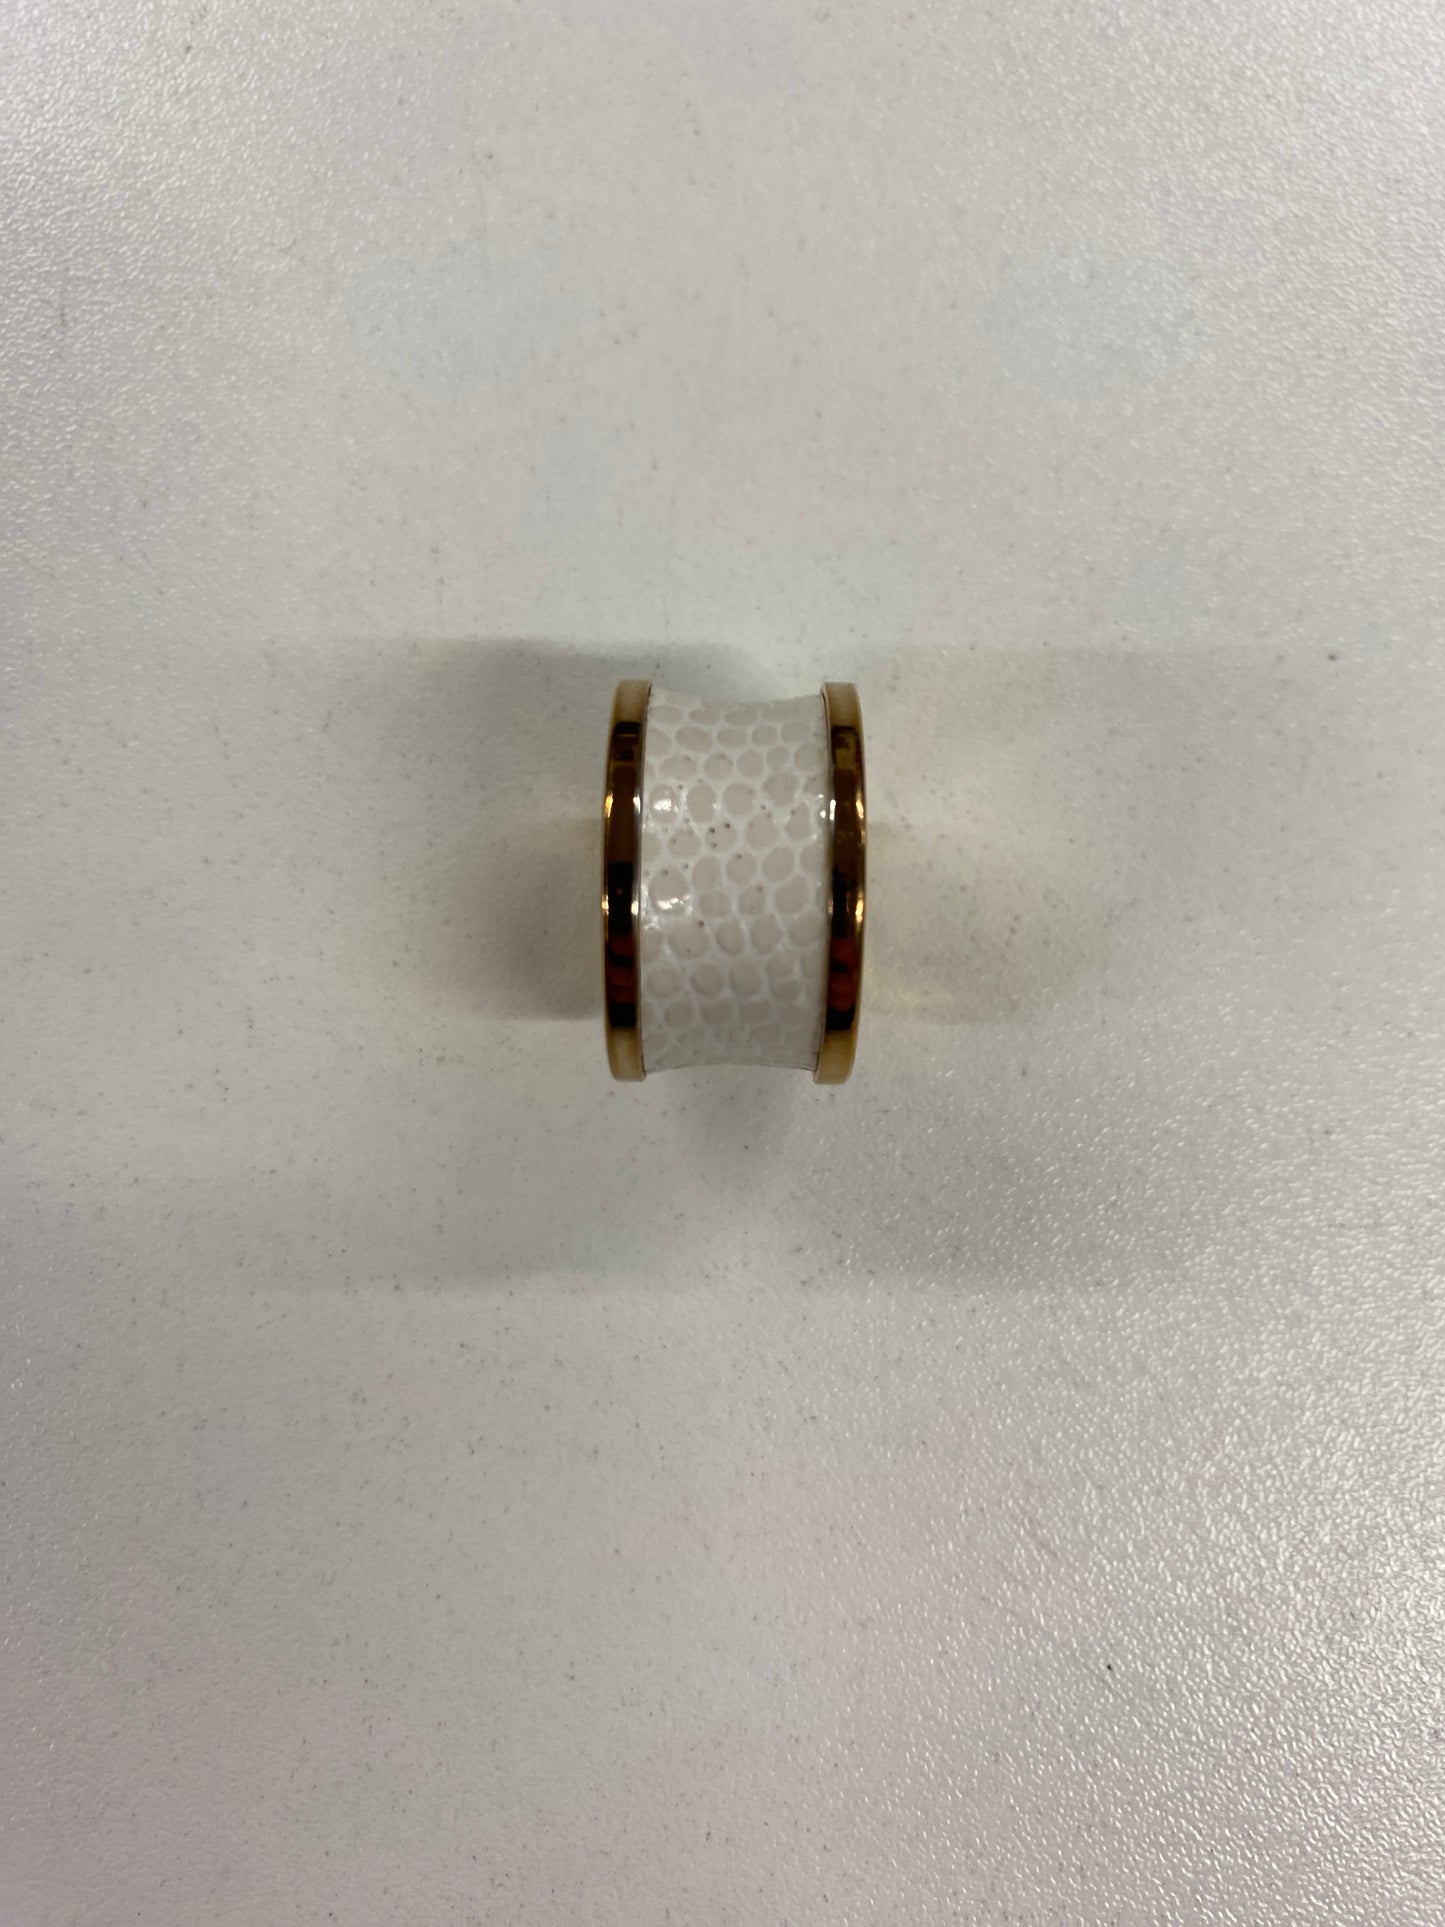 Calvin Klein Bronze and White Snake Effect Ring in Box